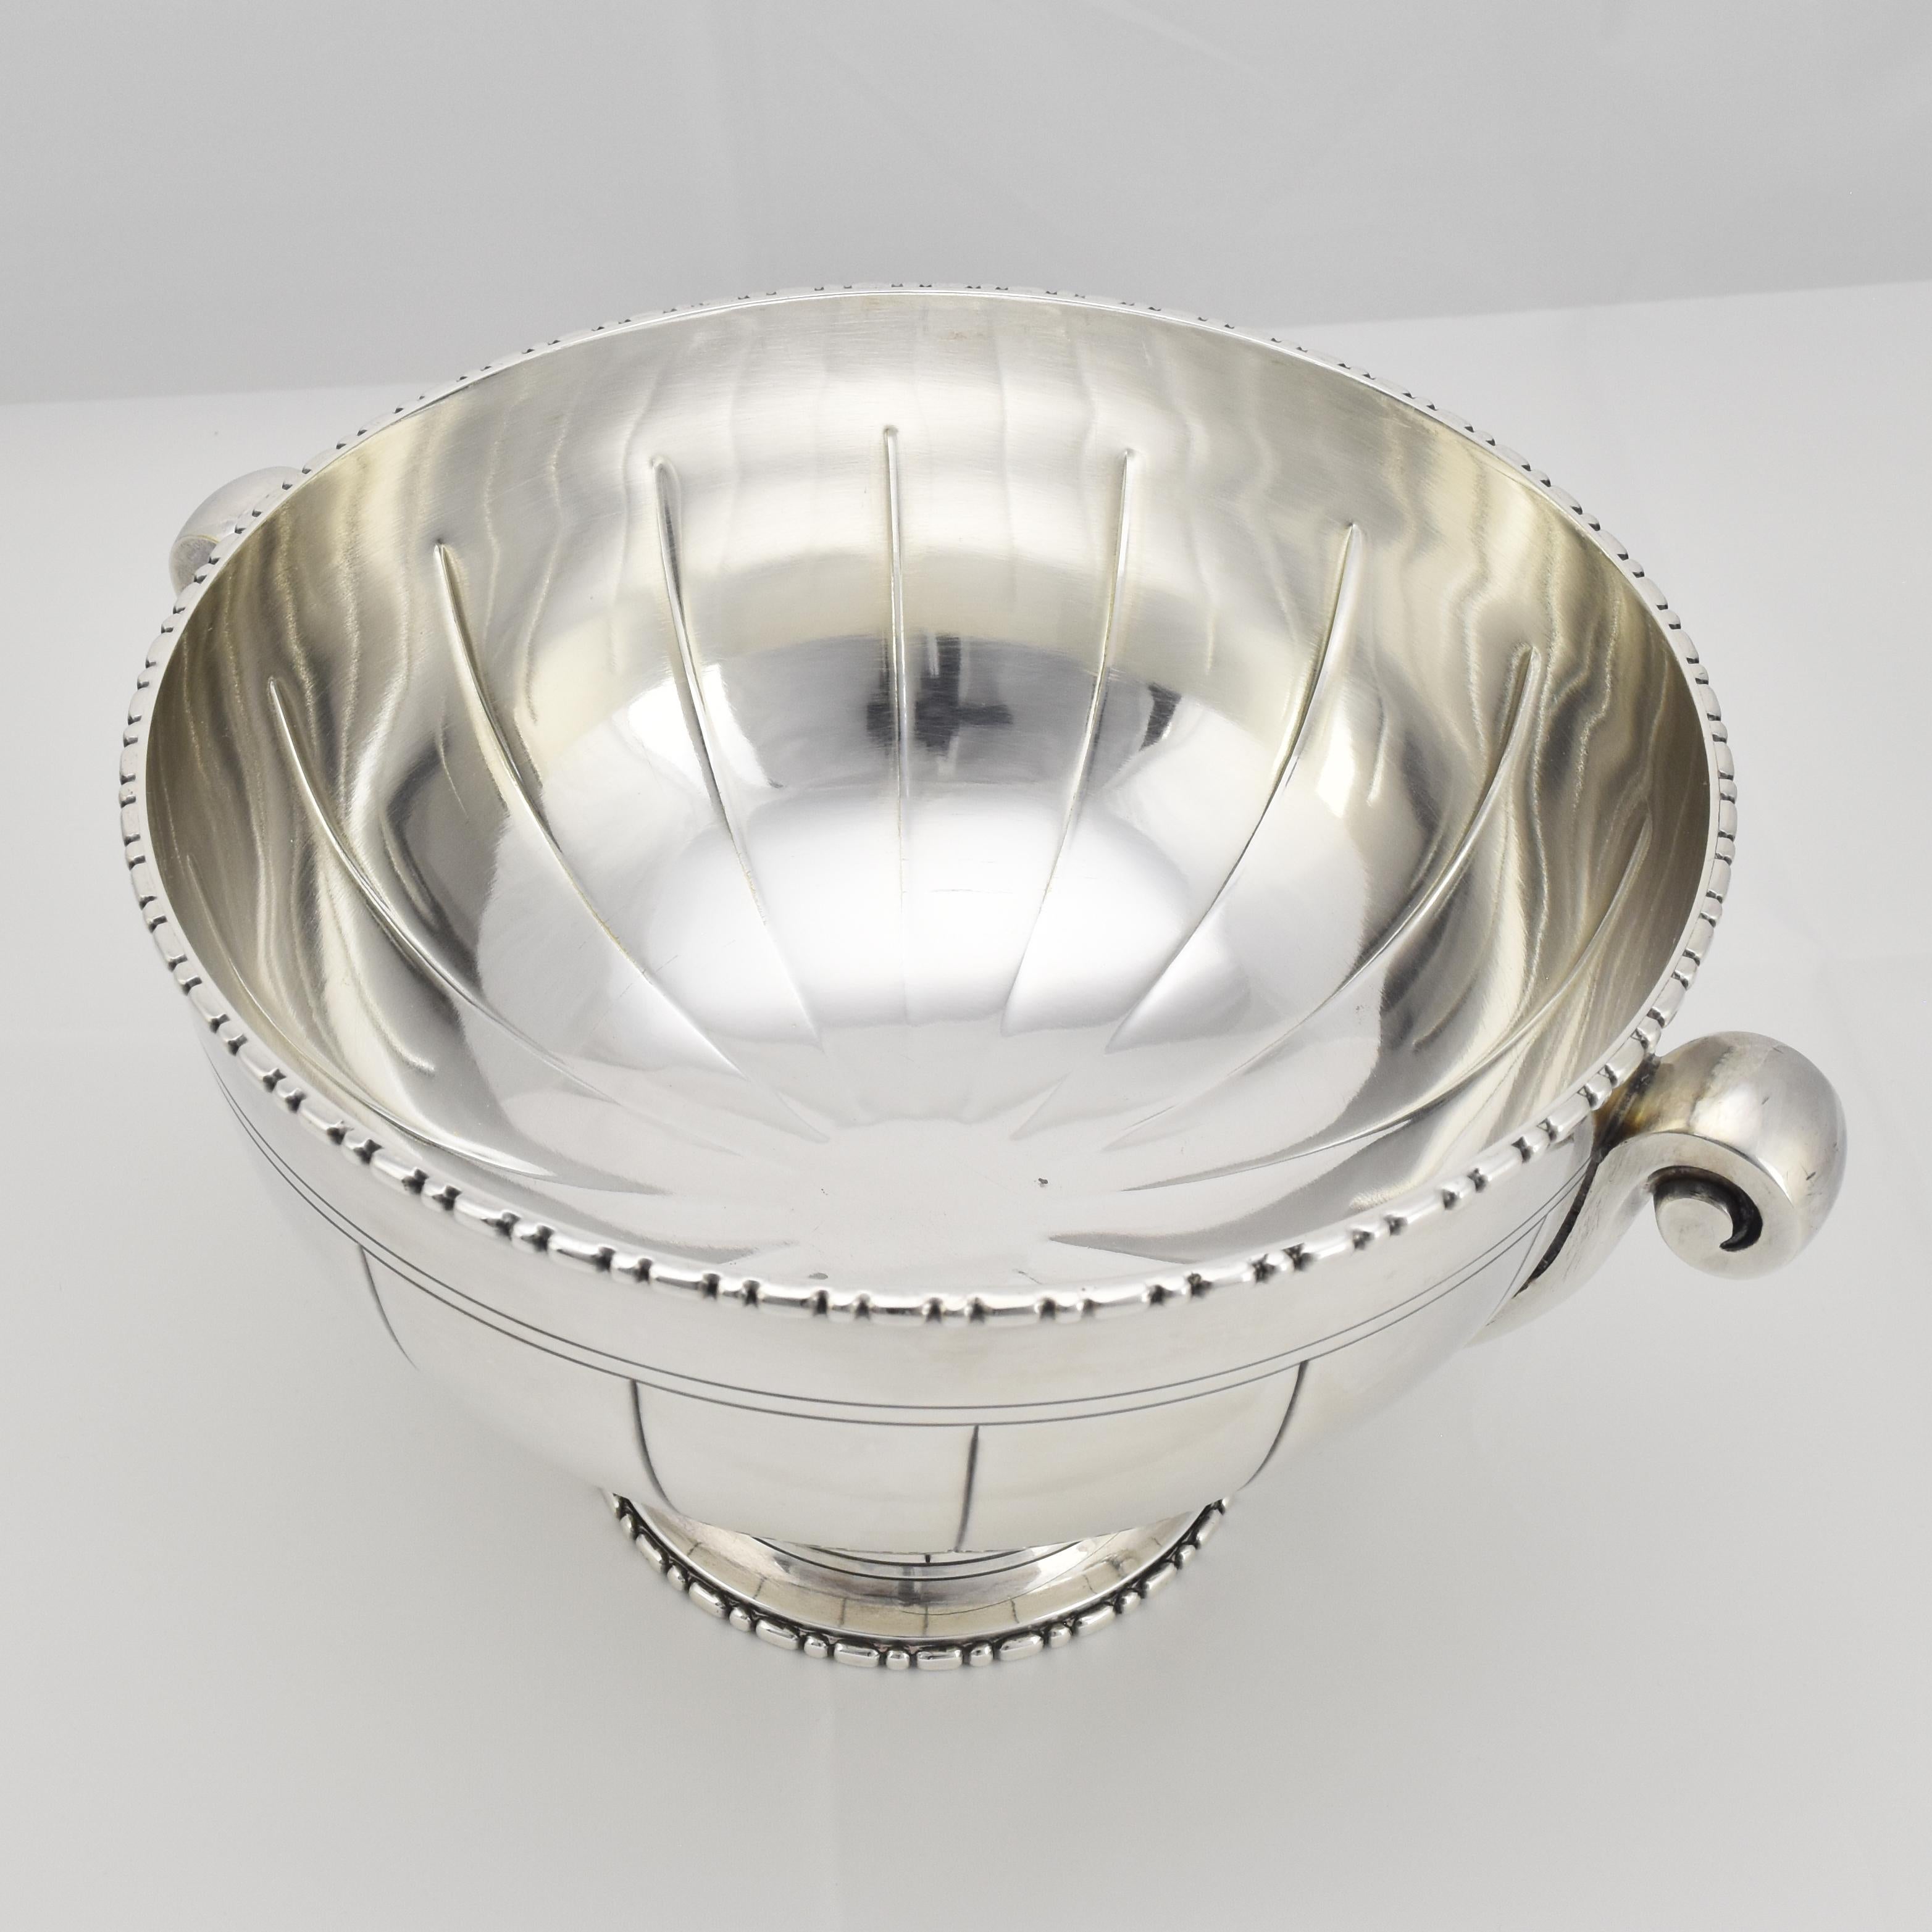 French Art Deco Centerpiece Silverplate Bowl by Bouillet & Bourdelle 1920s For Sale 2